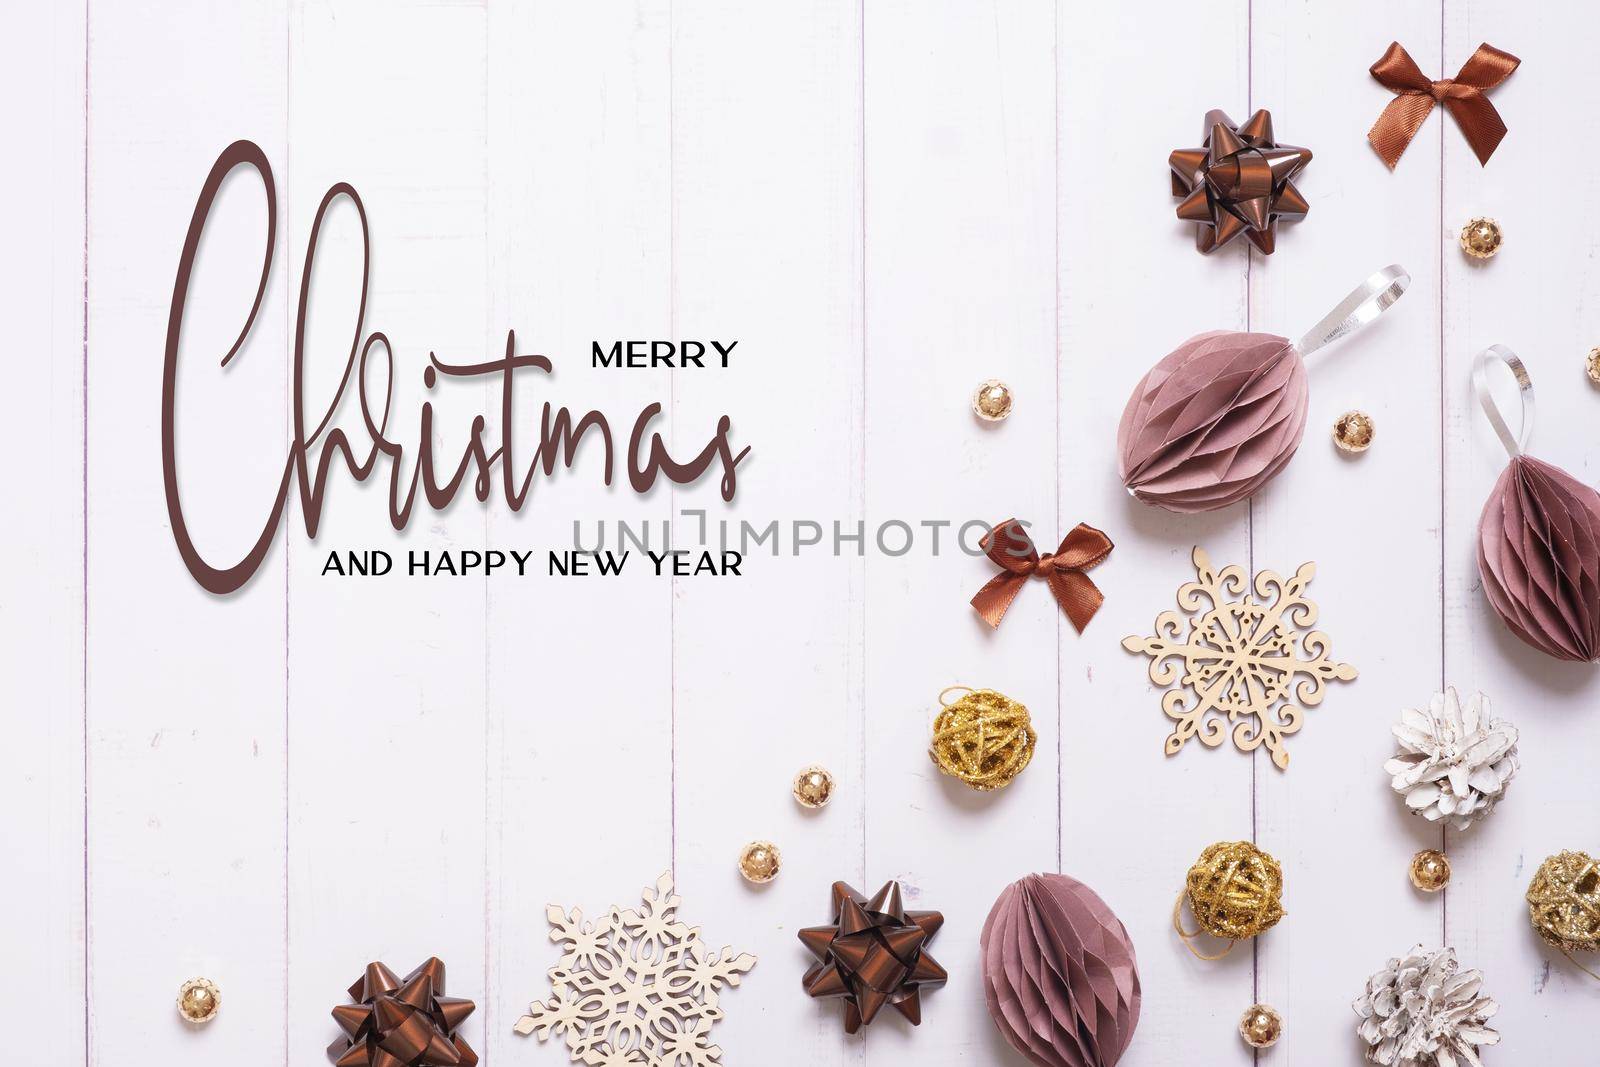 Merrry Christmas and Happy new year greeting card with composition flat lay on wooden background by ssvimaliss